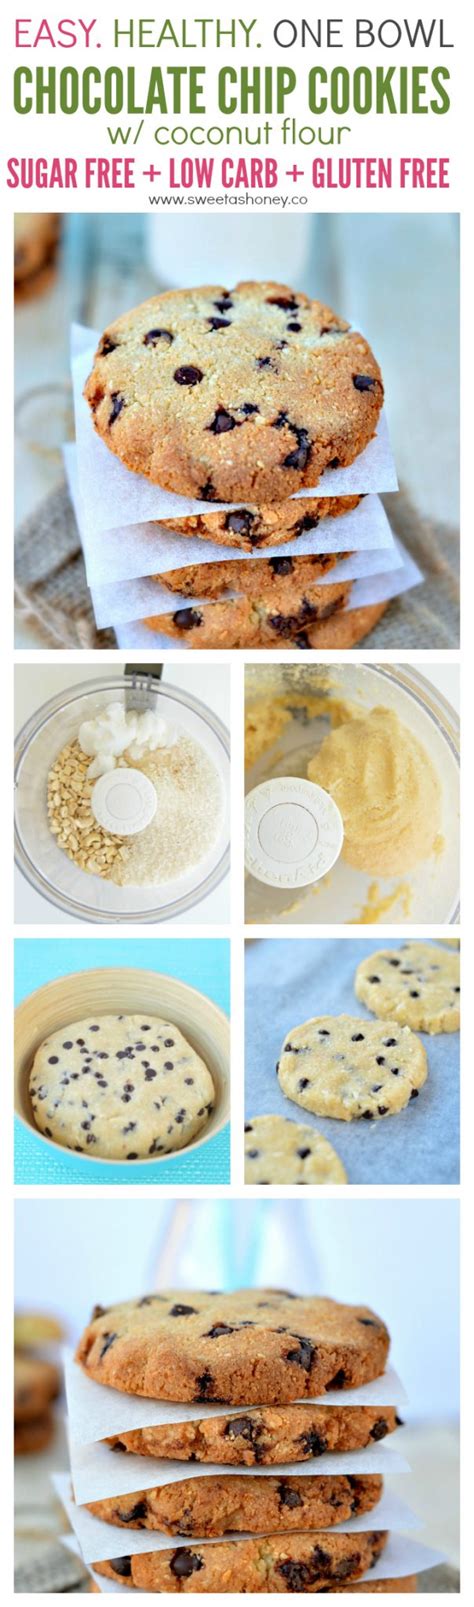 We named this recipe ultimate chocolate chip cookies, because it's got everything a cookie connoisseur could possibly ask for. Sugar free chocolate chip cookies | Low Carb, Gluten Free